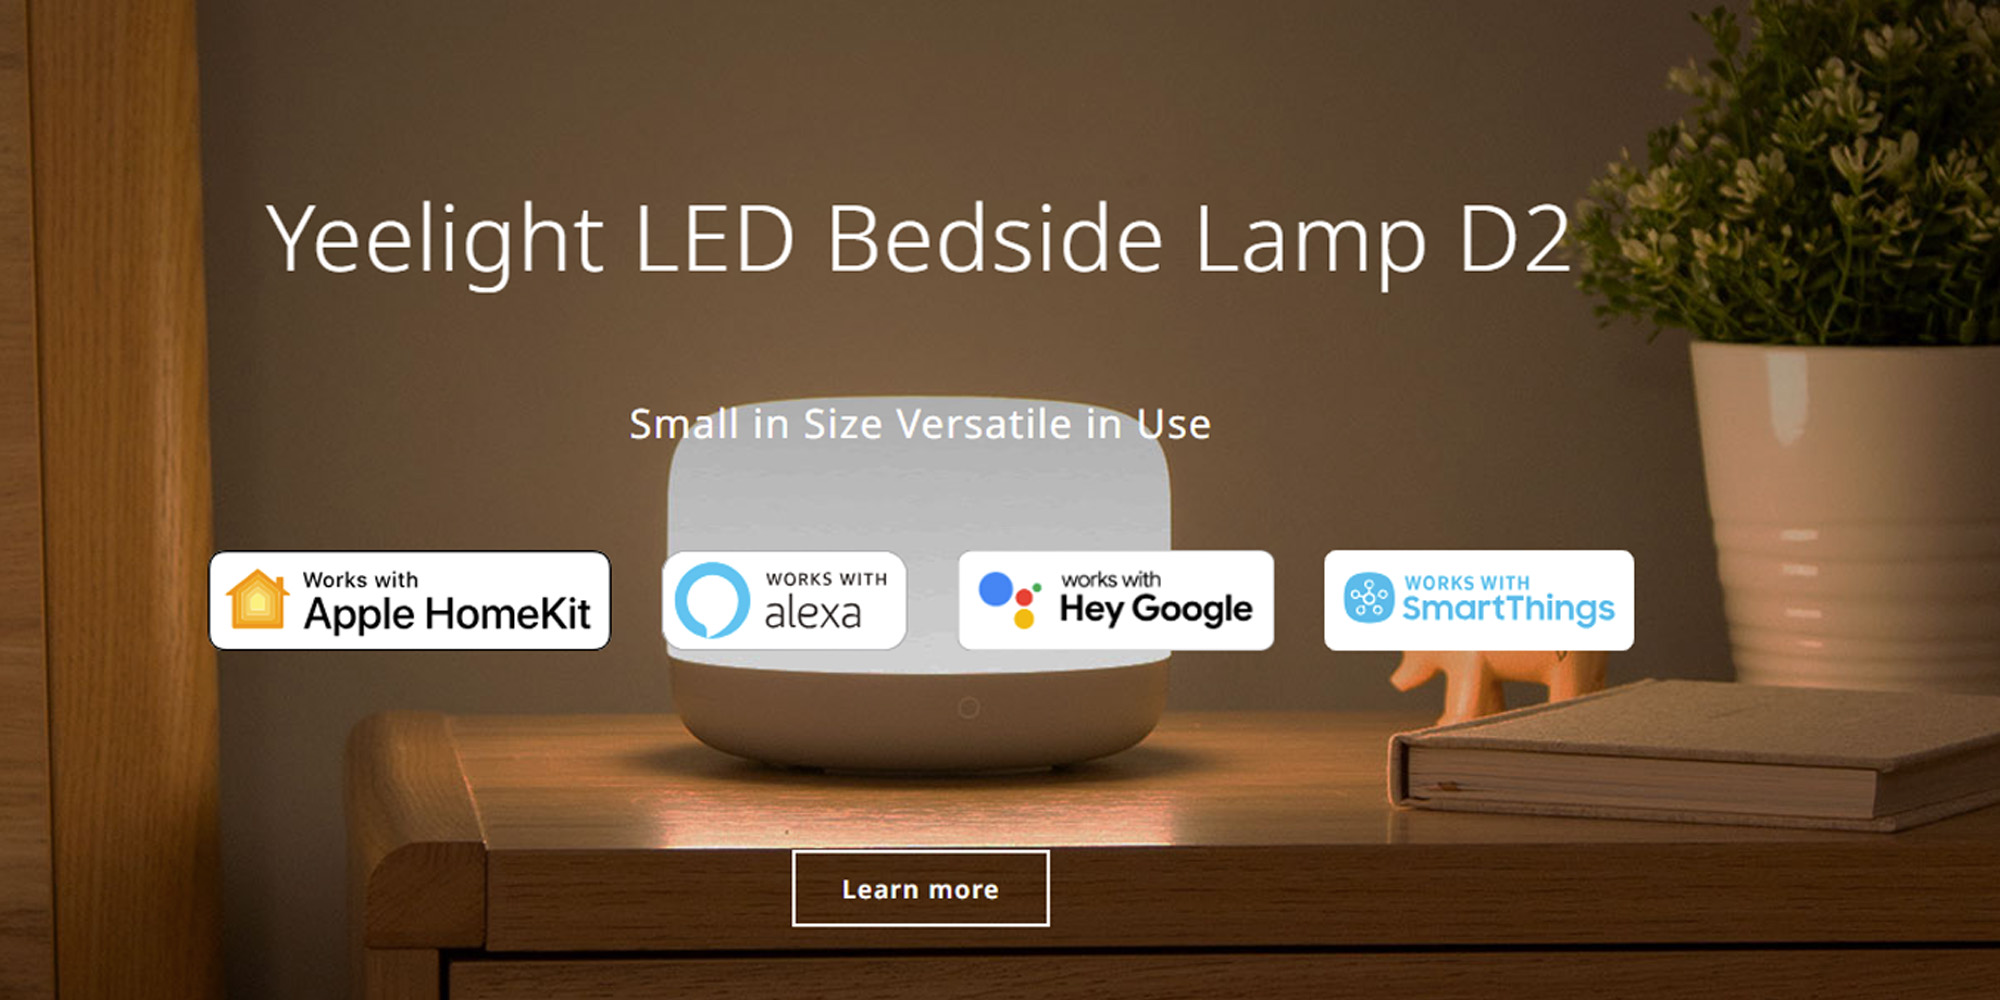 YEELIGHT Bedside Lamp D2: Smart LED Bedside Lamp with Adjustable Color Temperature, Brightness, and Color, White